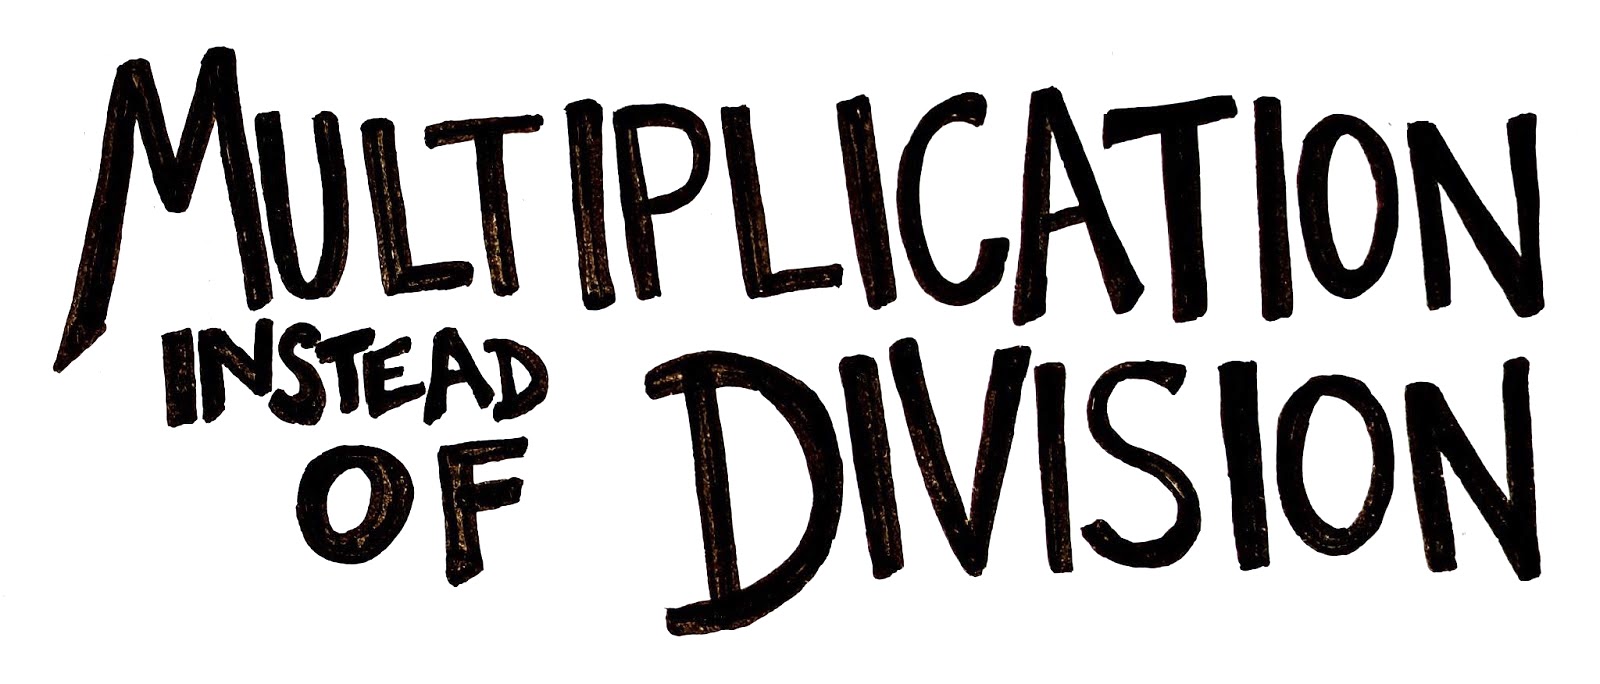 Word art of the title: multiplication instead of division